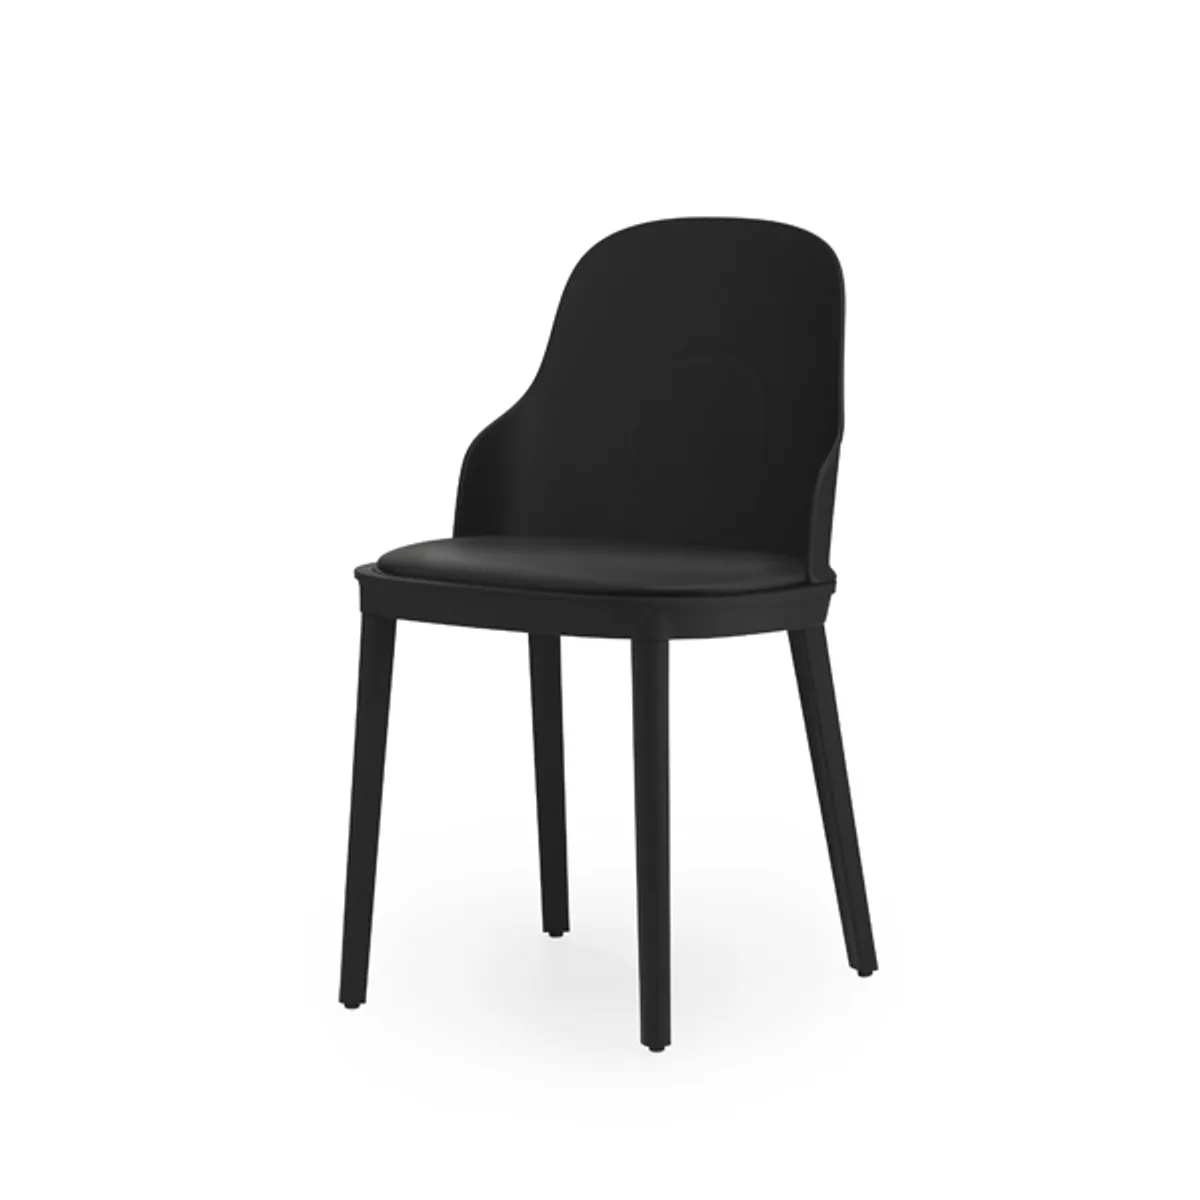 Bon soft poly chair Inside Out Contracts5